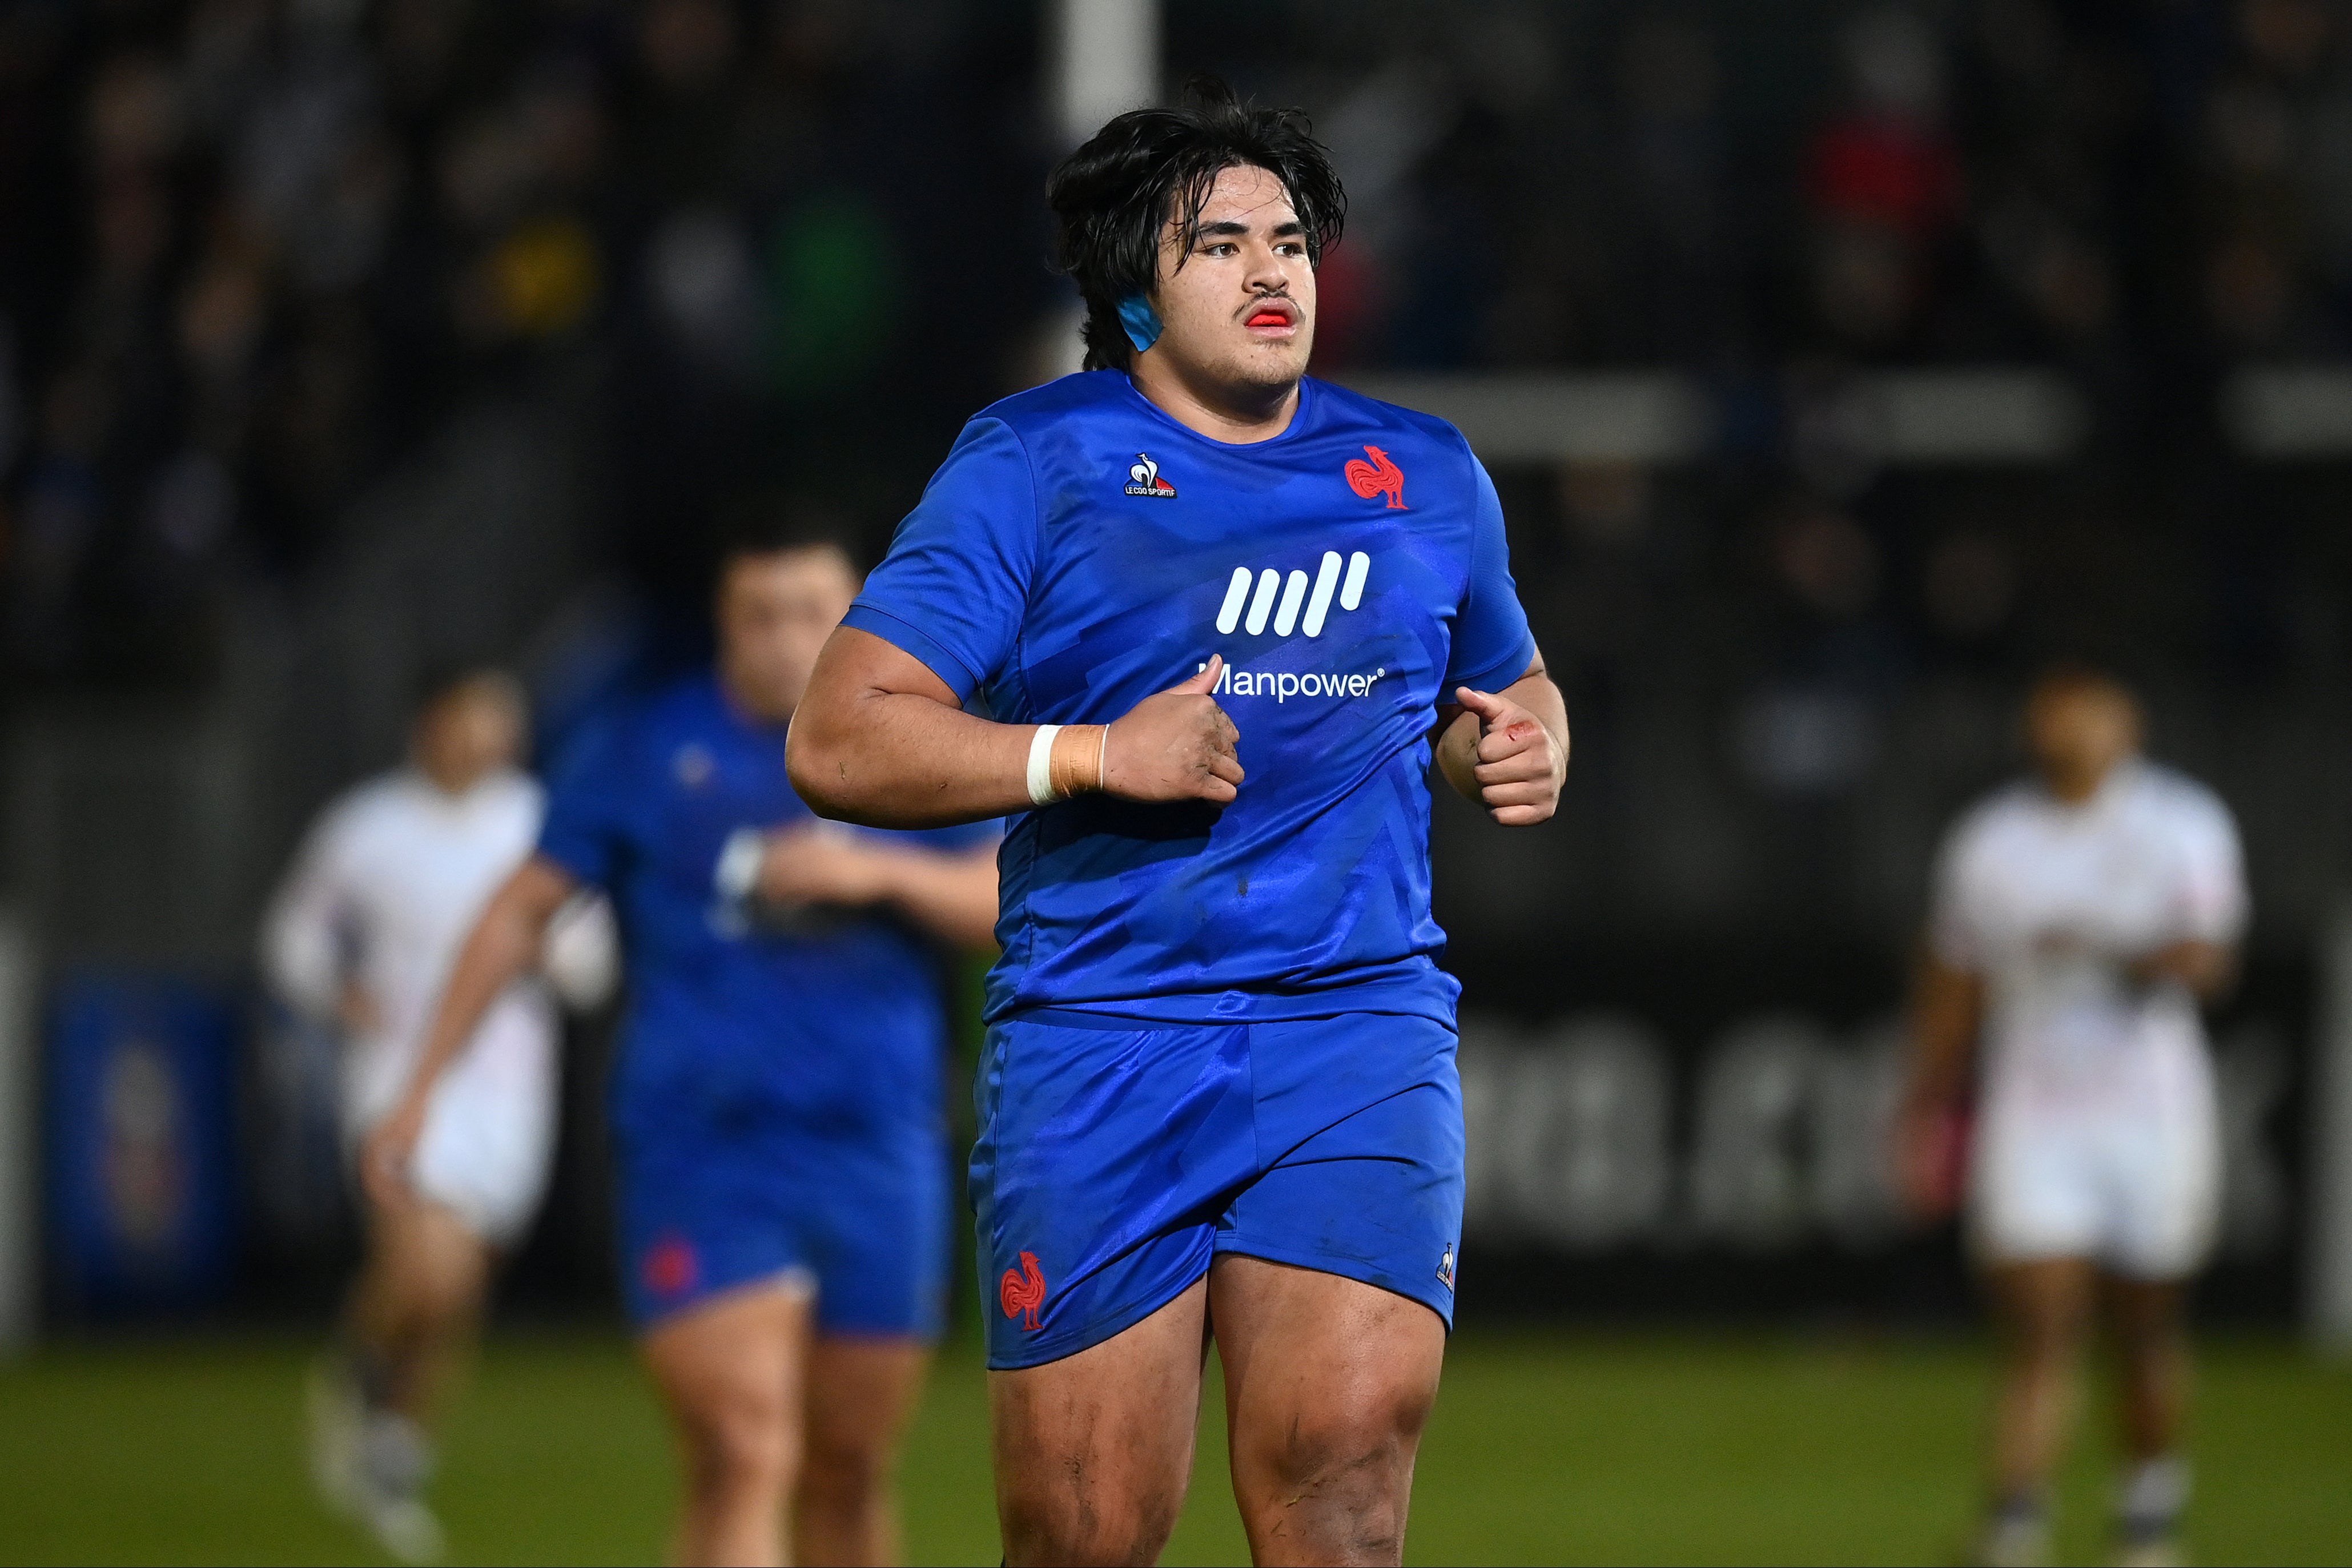 Posolo Tuilagi will make his France debut against Ireland